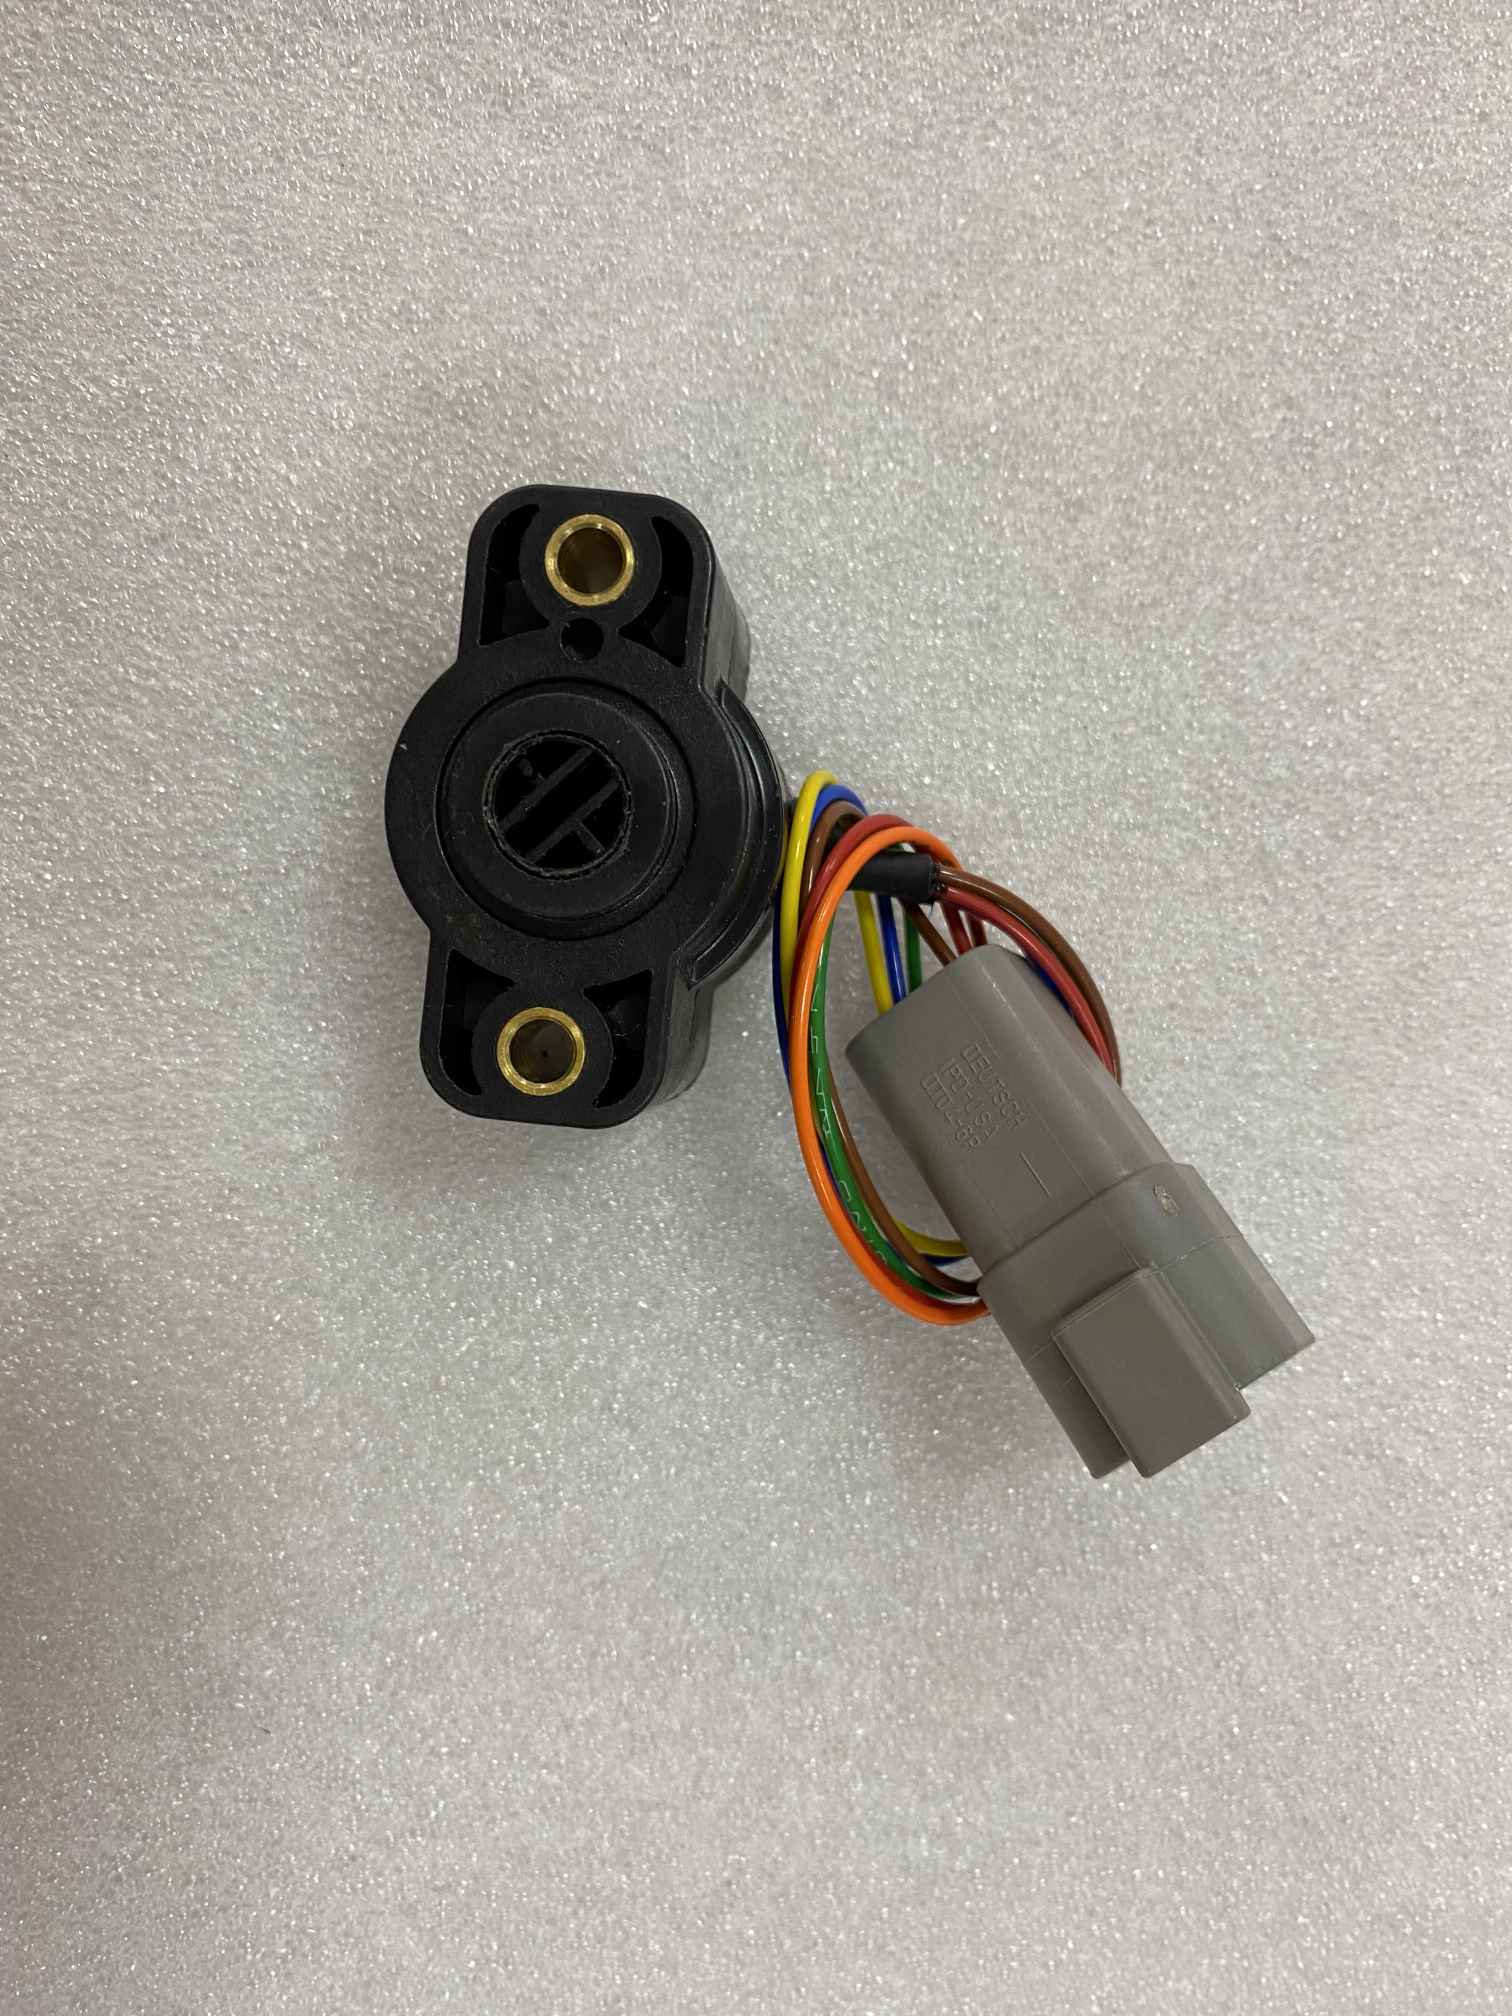 1001146963 1001205345 1001234204 1001225164 1001235104 replacement sensor fitting for JLG